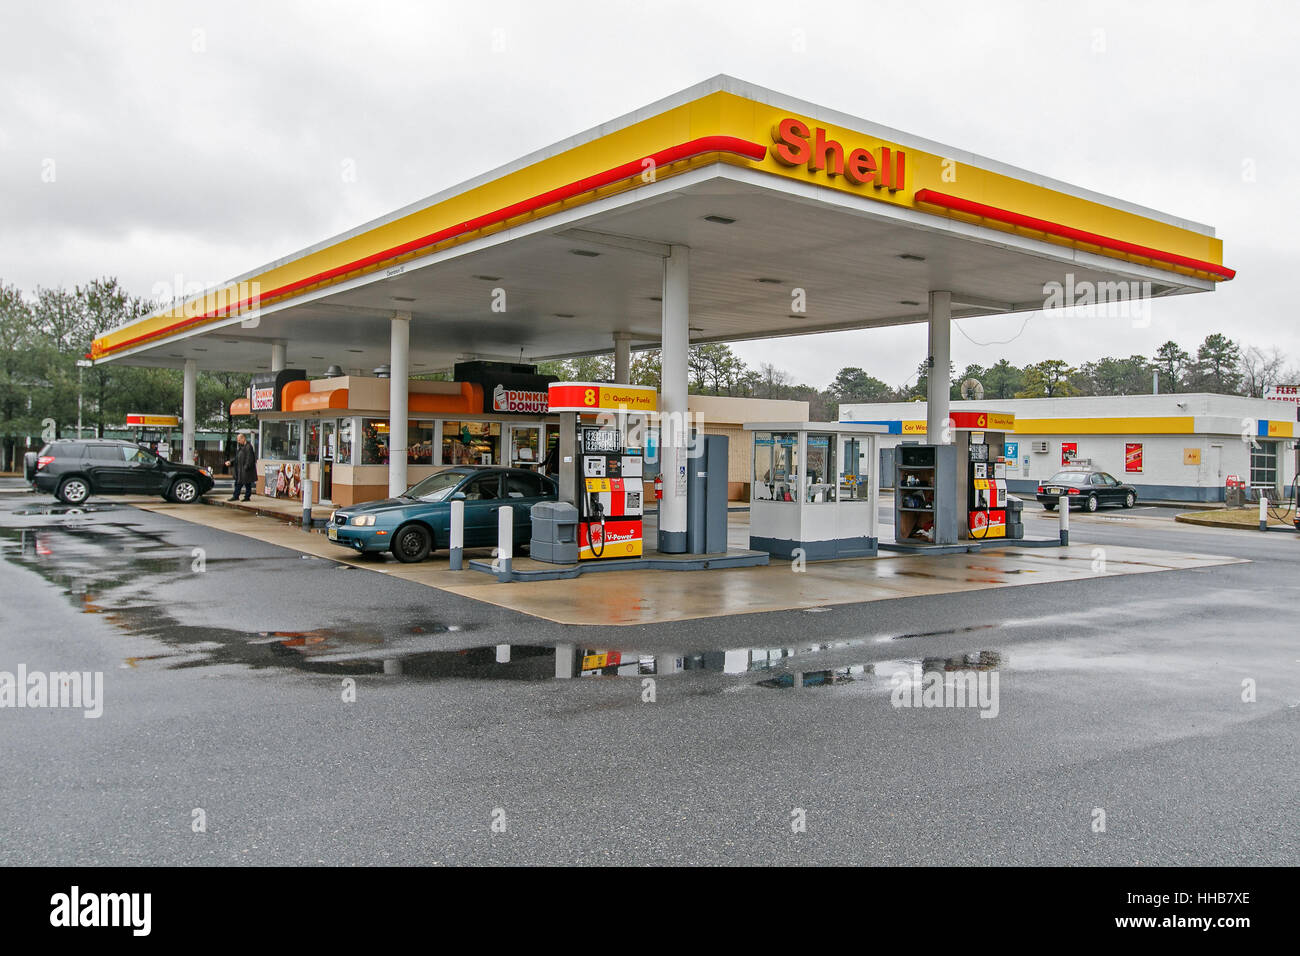 Shell gas station is seen on a cloudy day. Stock Photo